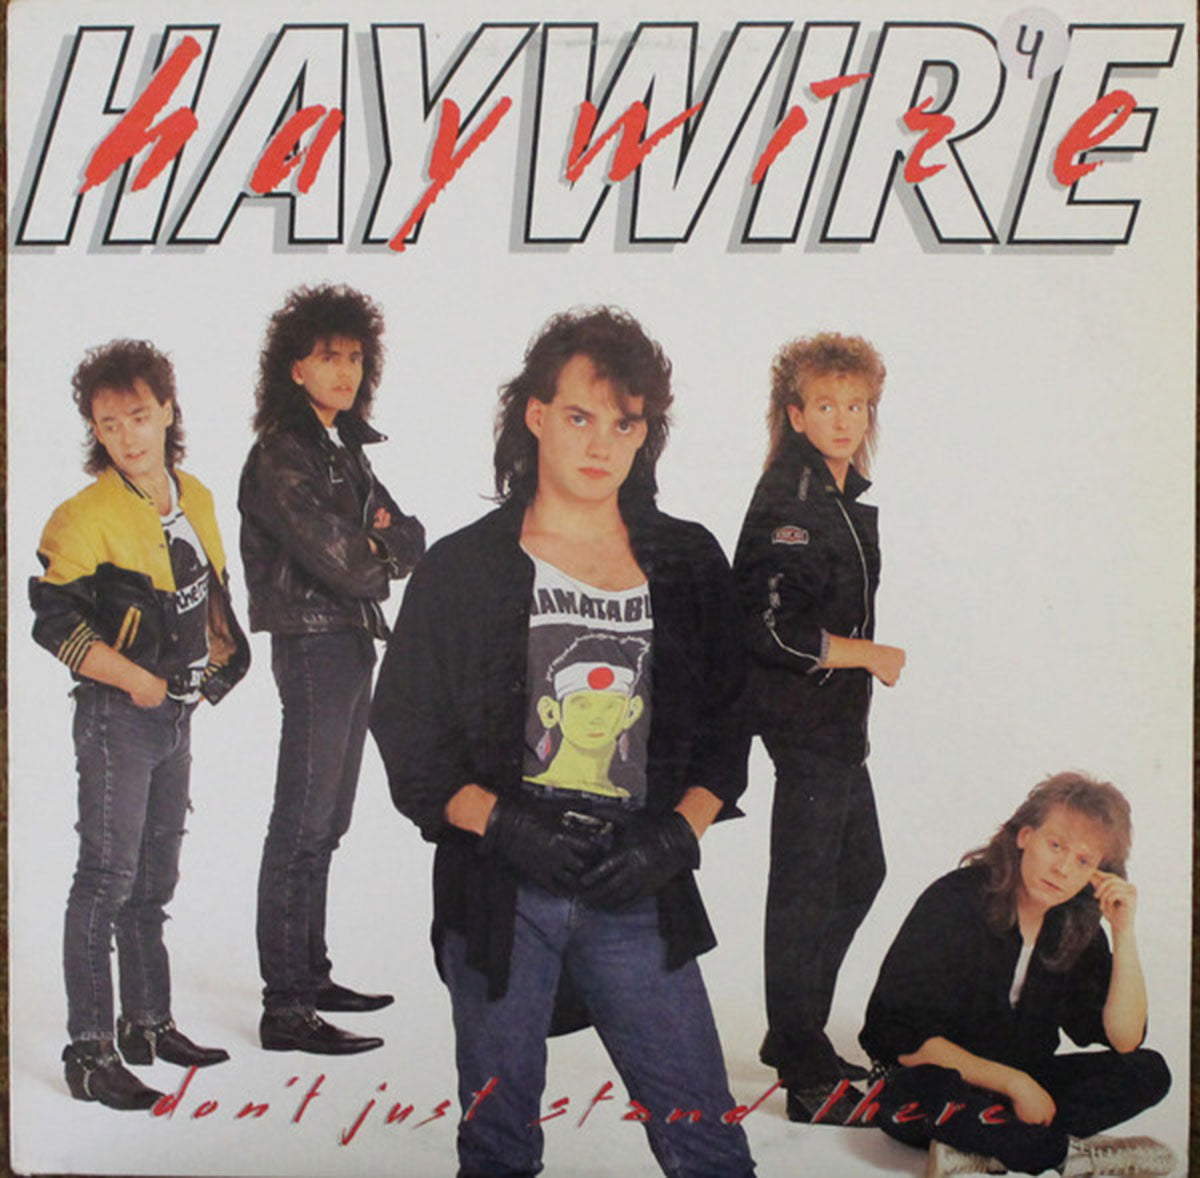 Haywire – Don't Just Stand There